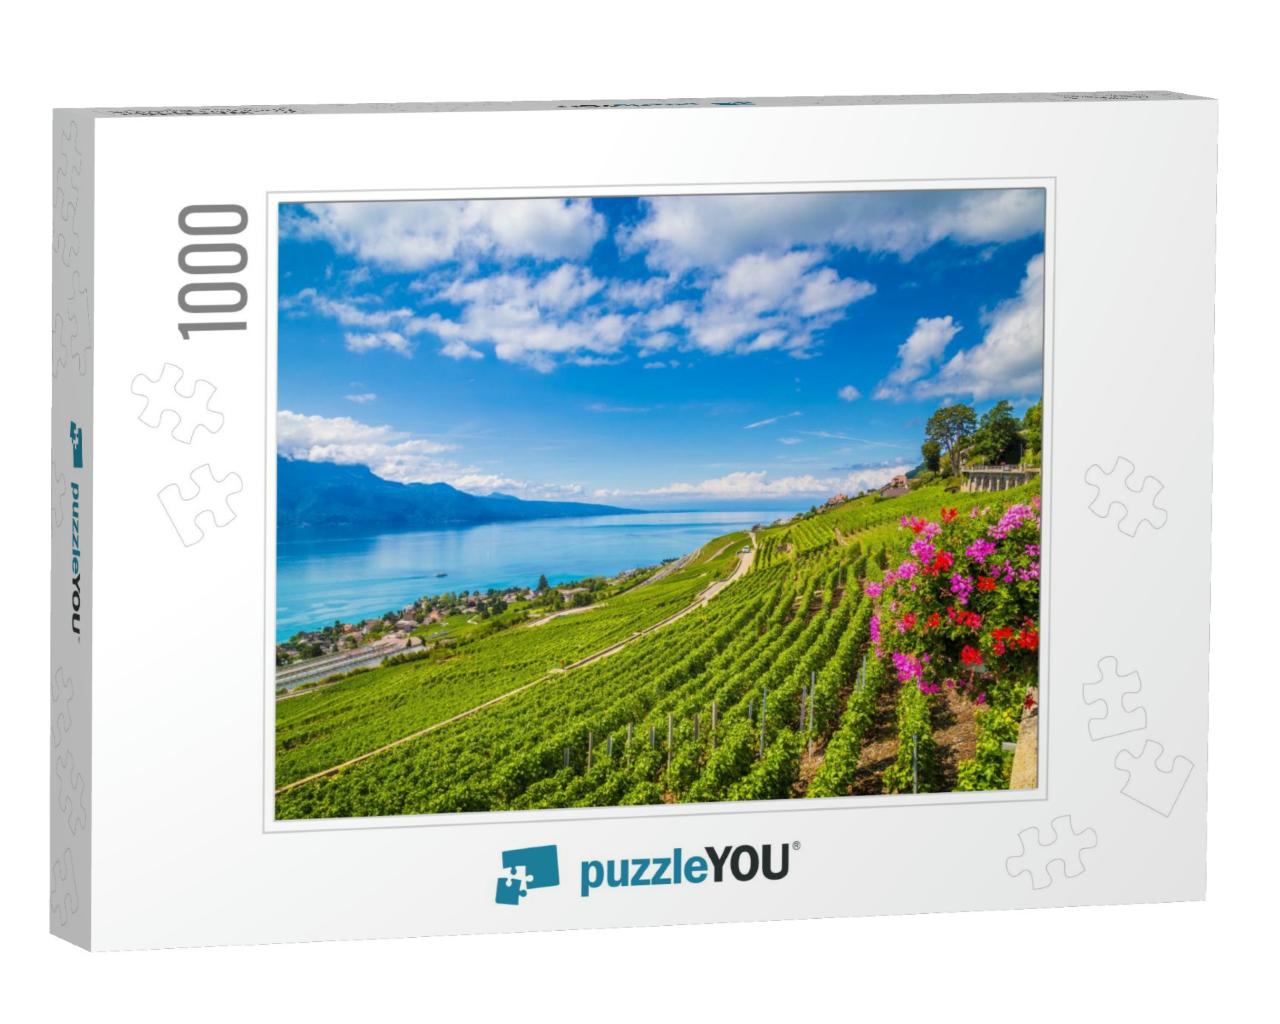 Beautiful Scenery with Rows of Vineyard Terraces in Famou... Jigsaw Puzzle with 1000 pieces